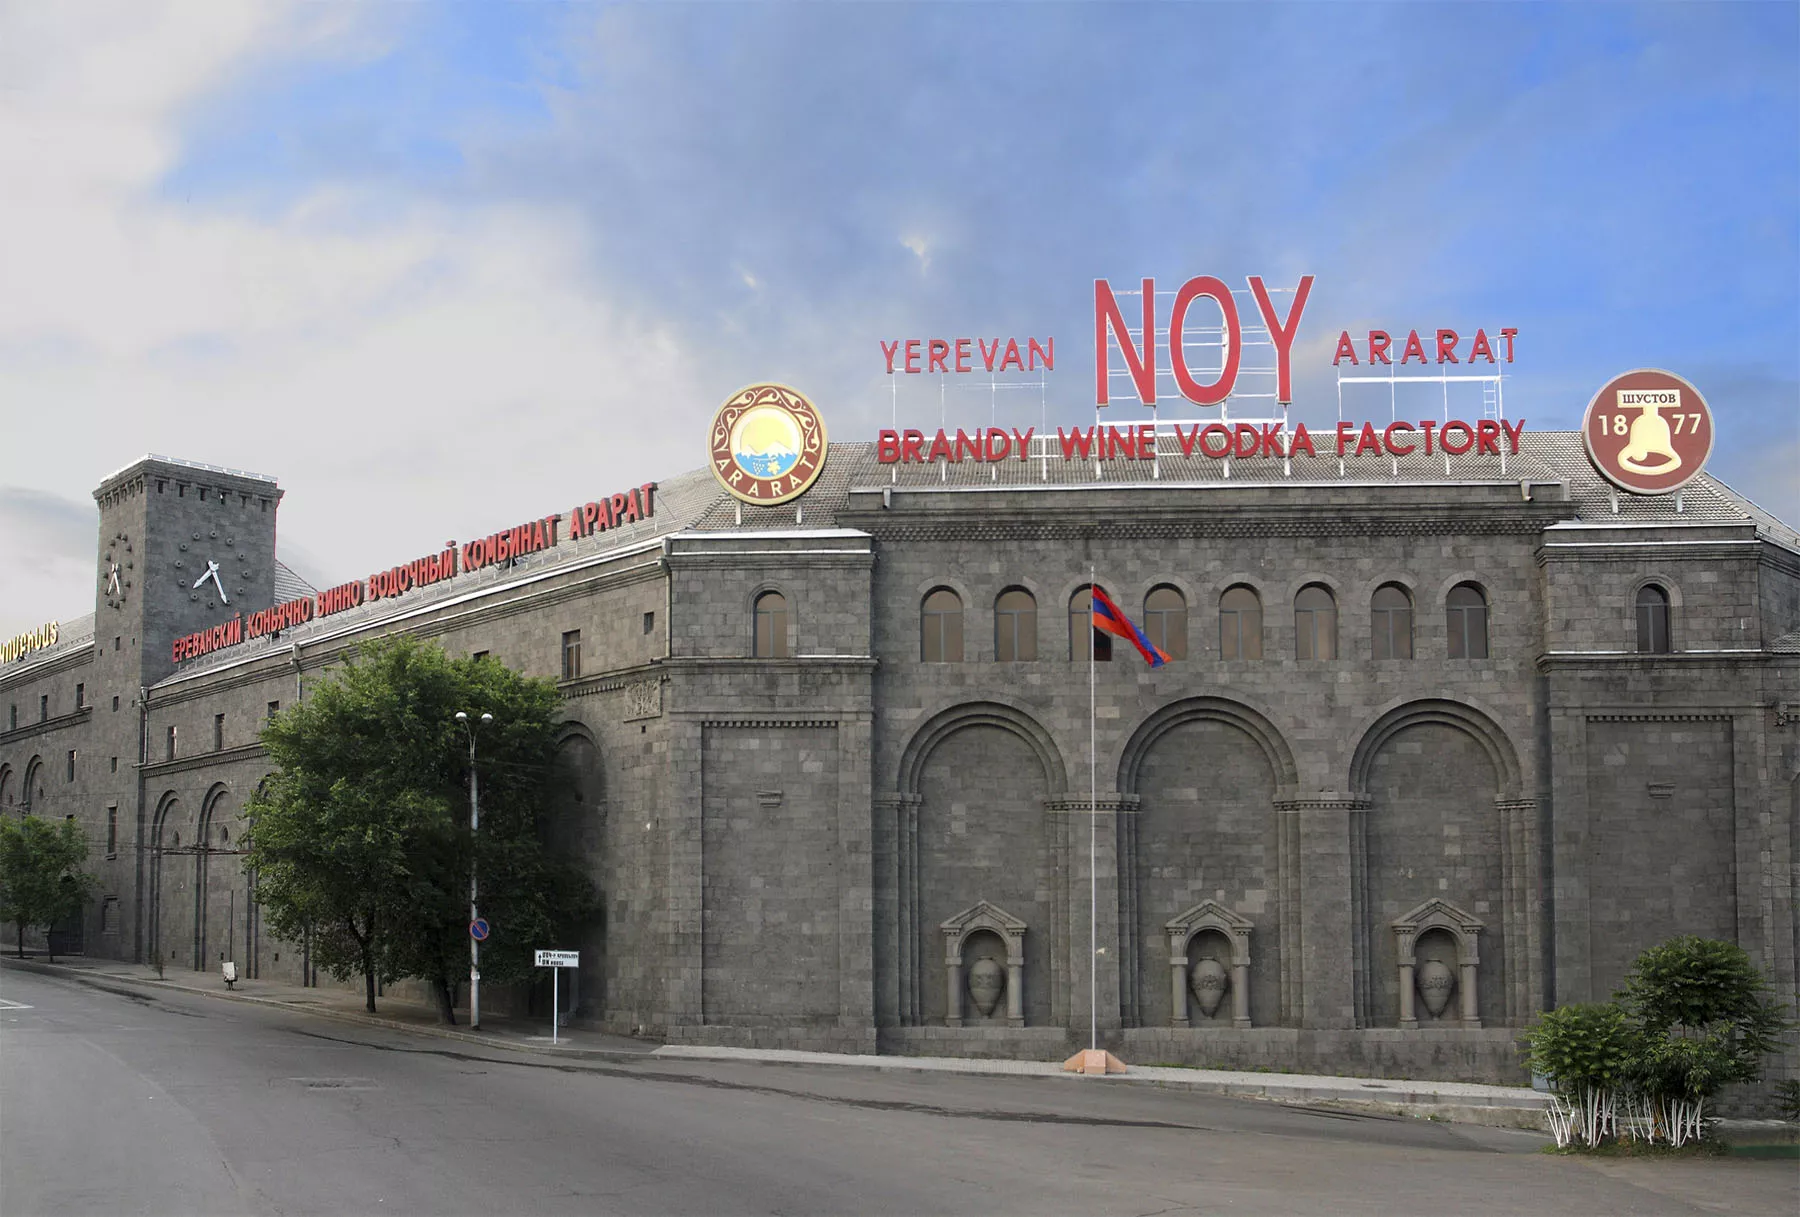 Yerevan Brandy and Wine and Vodka Factory Noah in Armenia, Middle East | Wineries - Rated 3.7